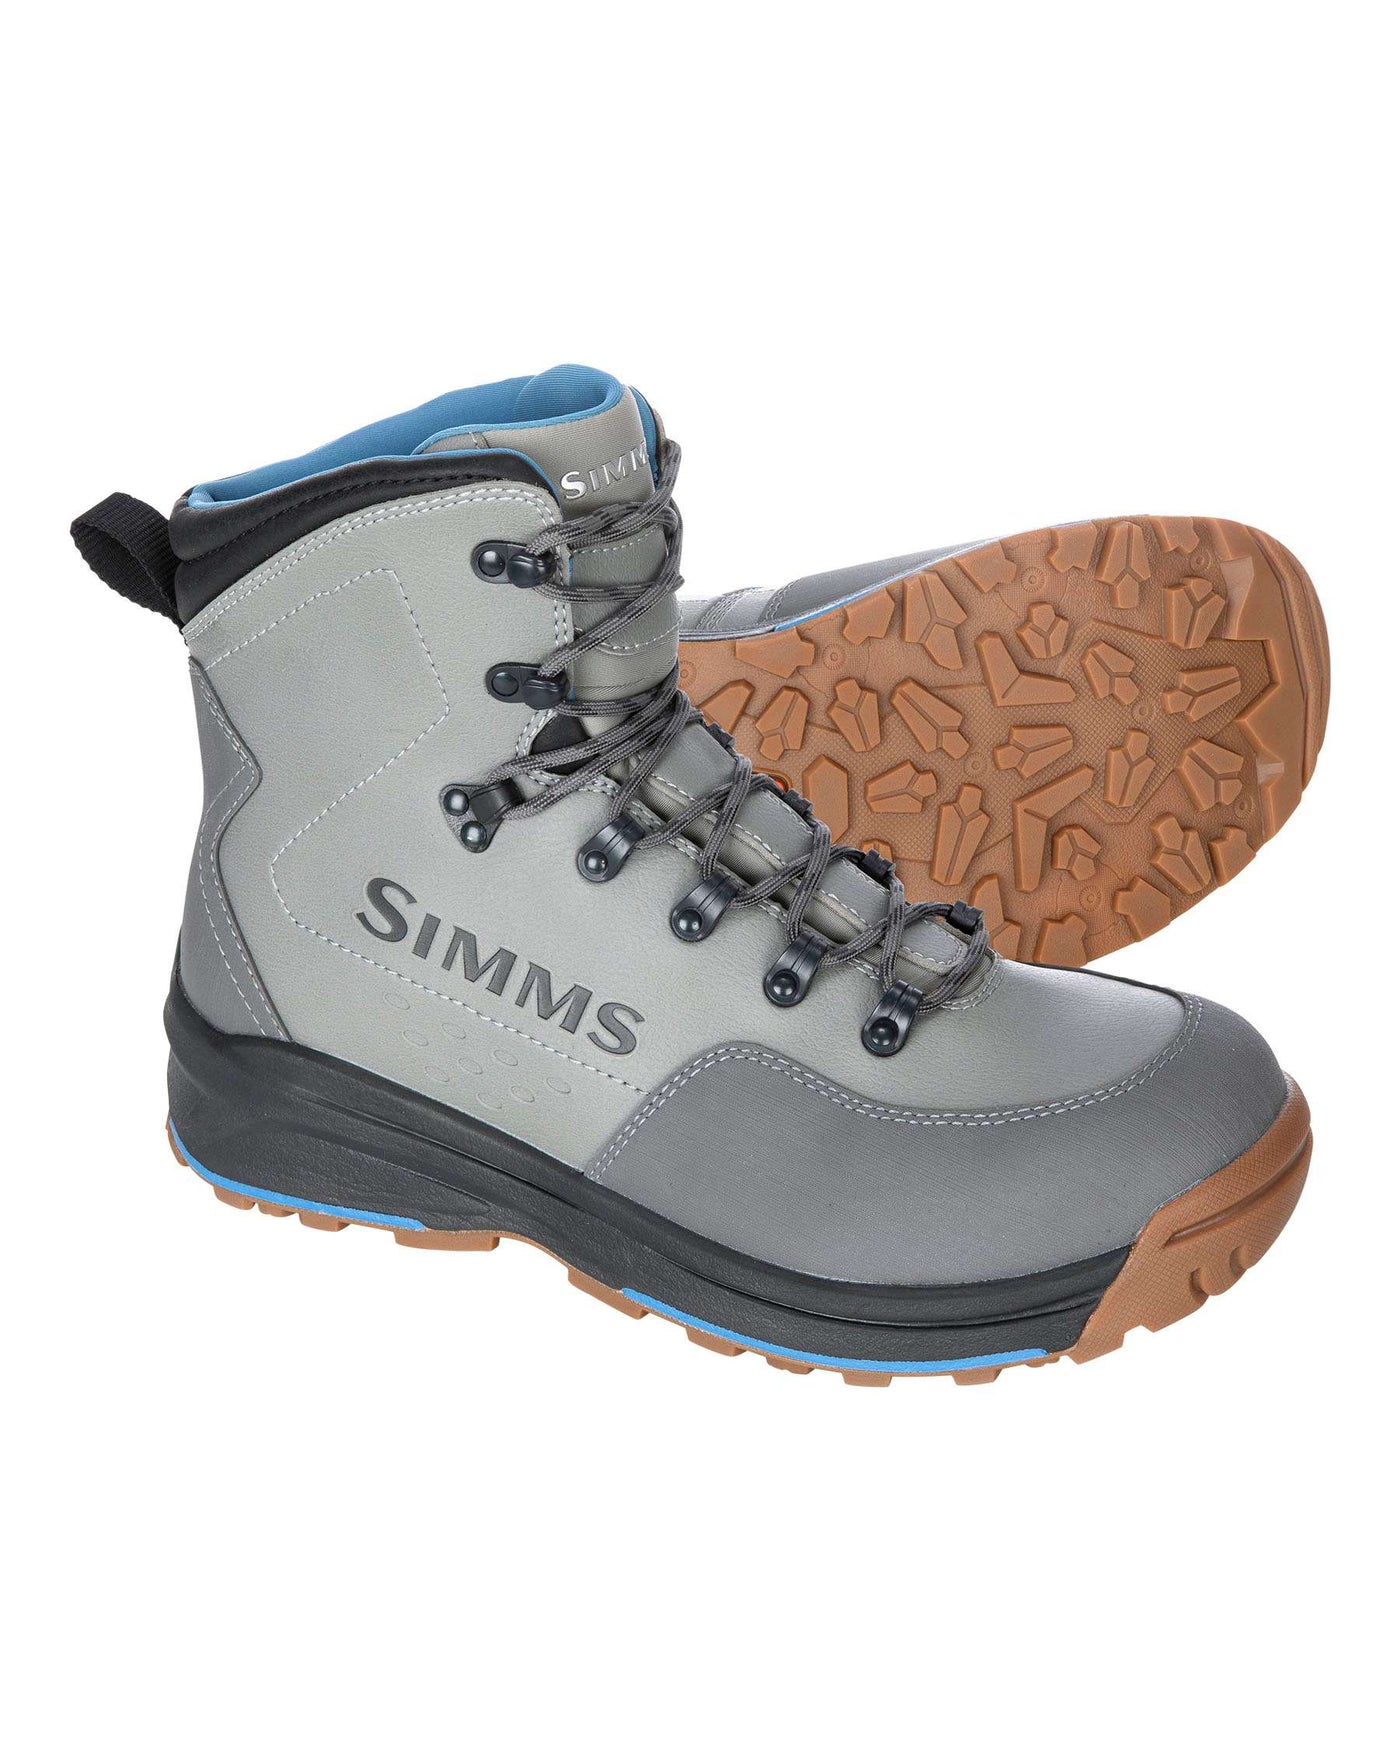 Men's Fishing Boots & Shoes - Footwear – AFTCO